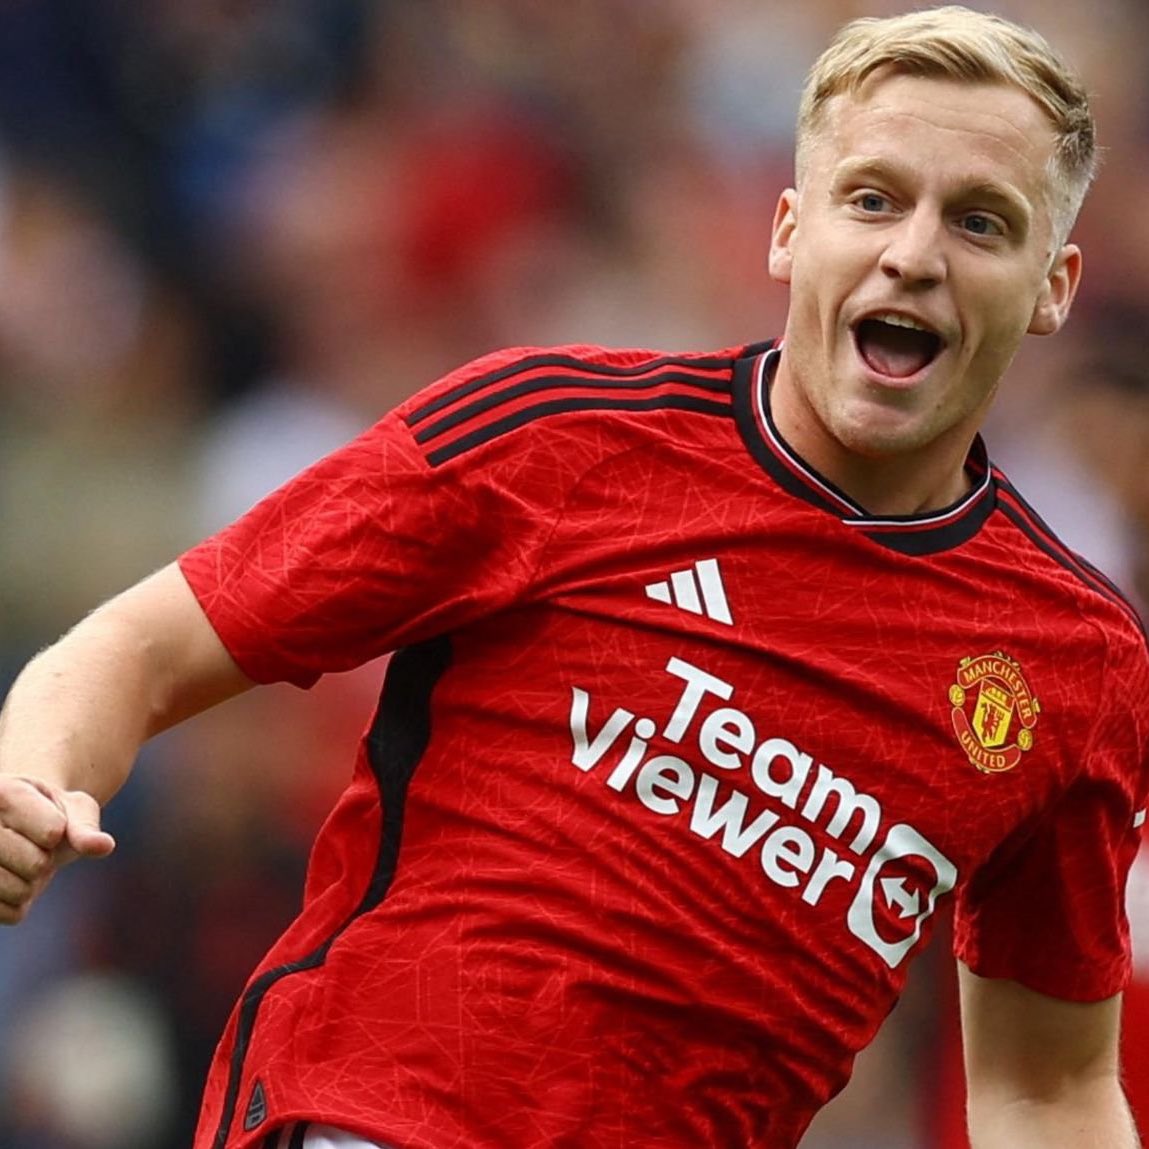 Transfer News Live on X: "🚨 Donny van de Beek is set to join Eintracht Frankfurt, with a verbal agreement now confirmed. The deal involves a loan until June, with a €15M